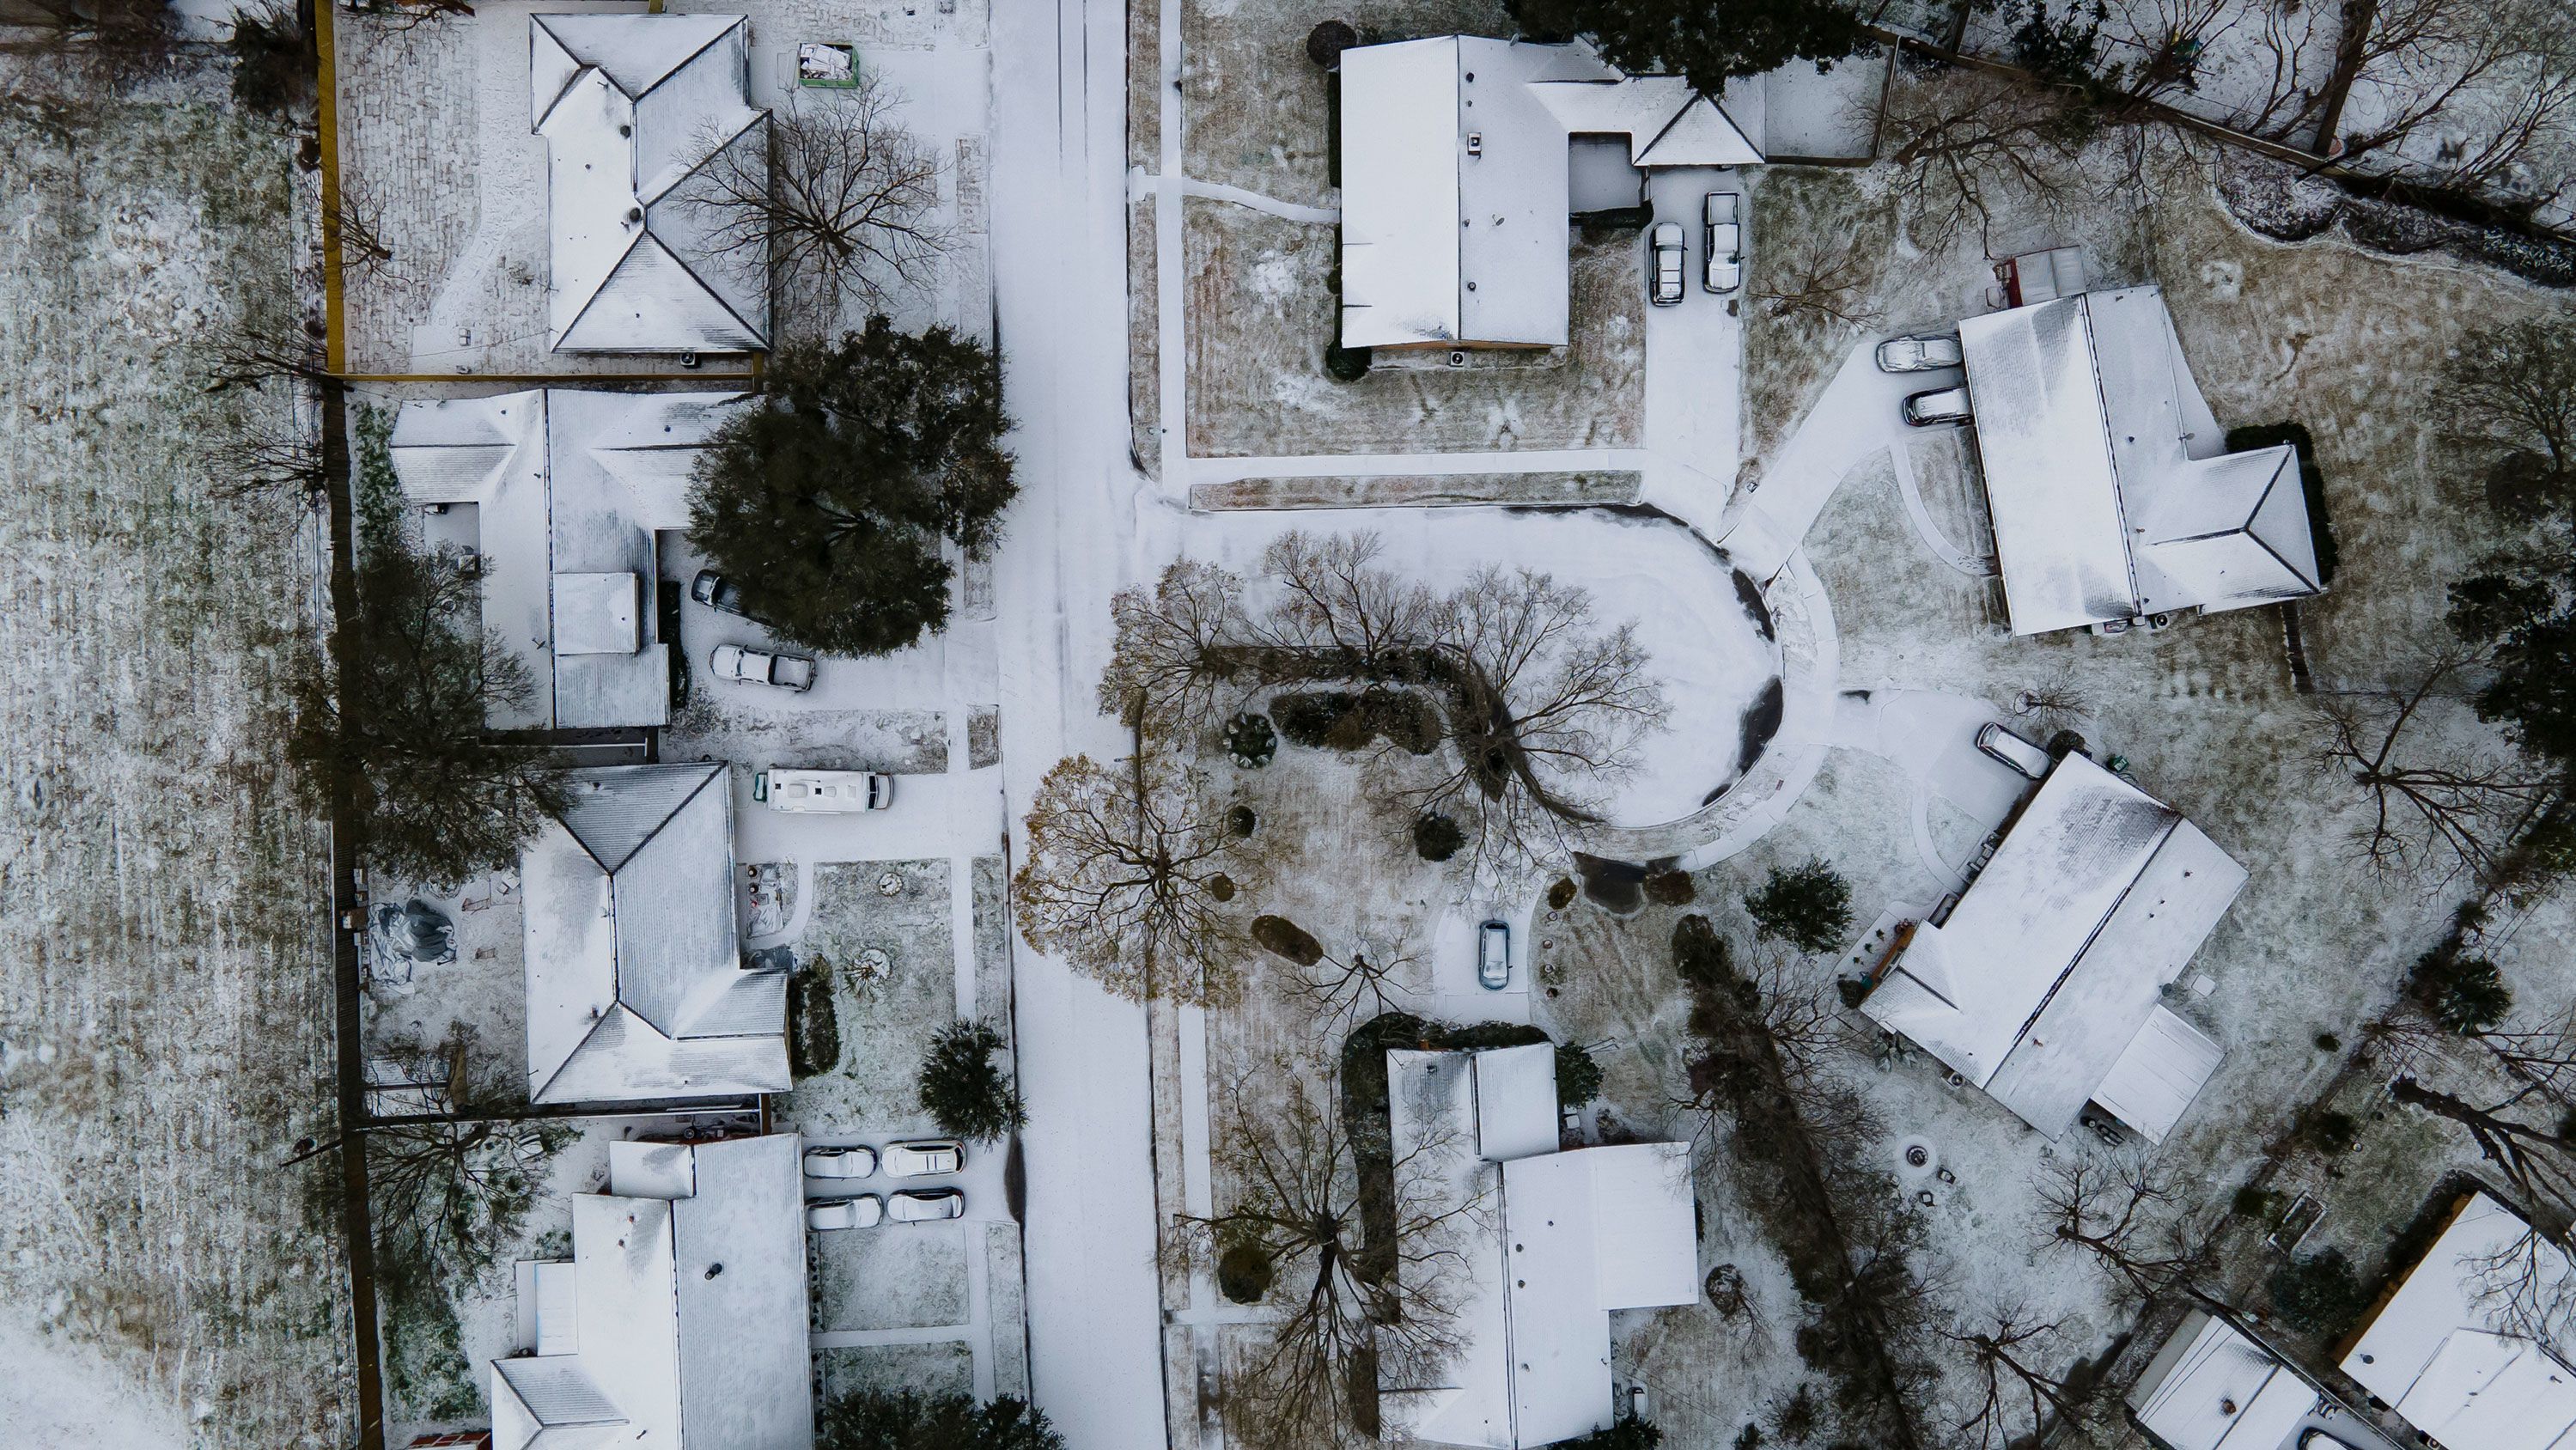 Homes in Houston are covered in snow on Monday, Feb. 15, 2021.